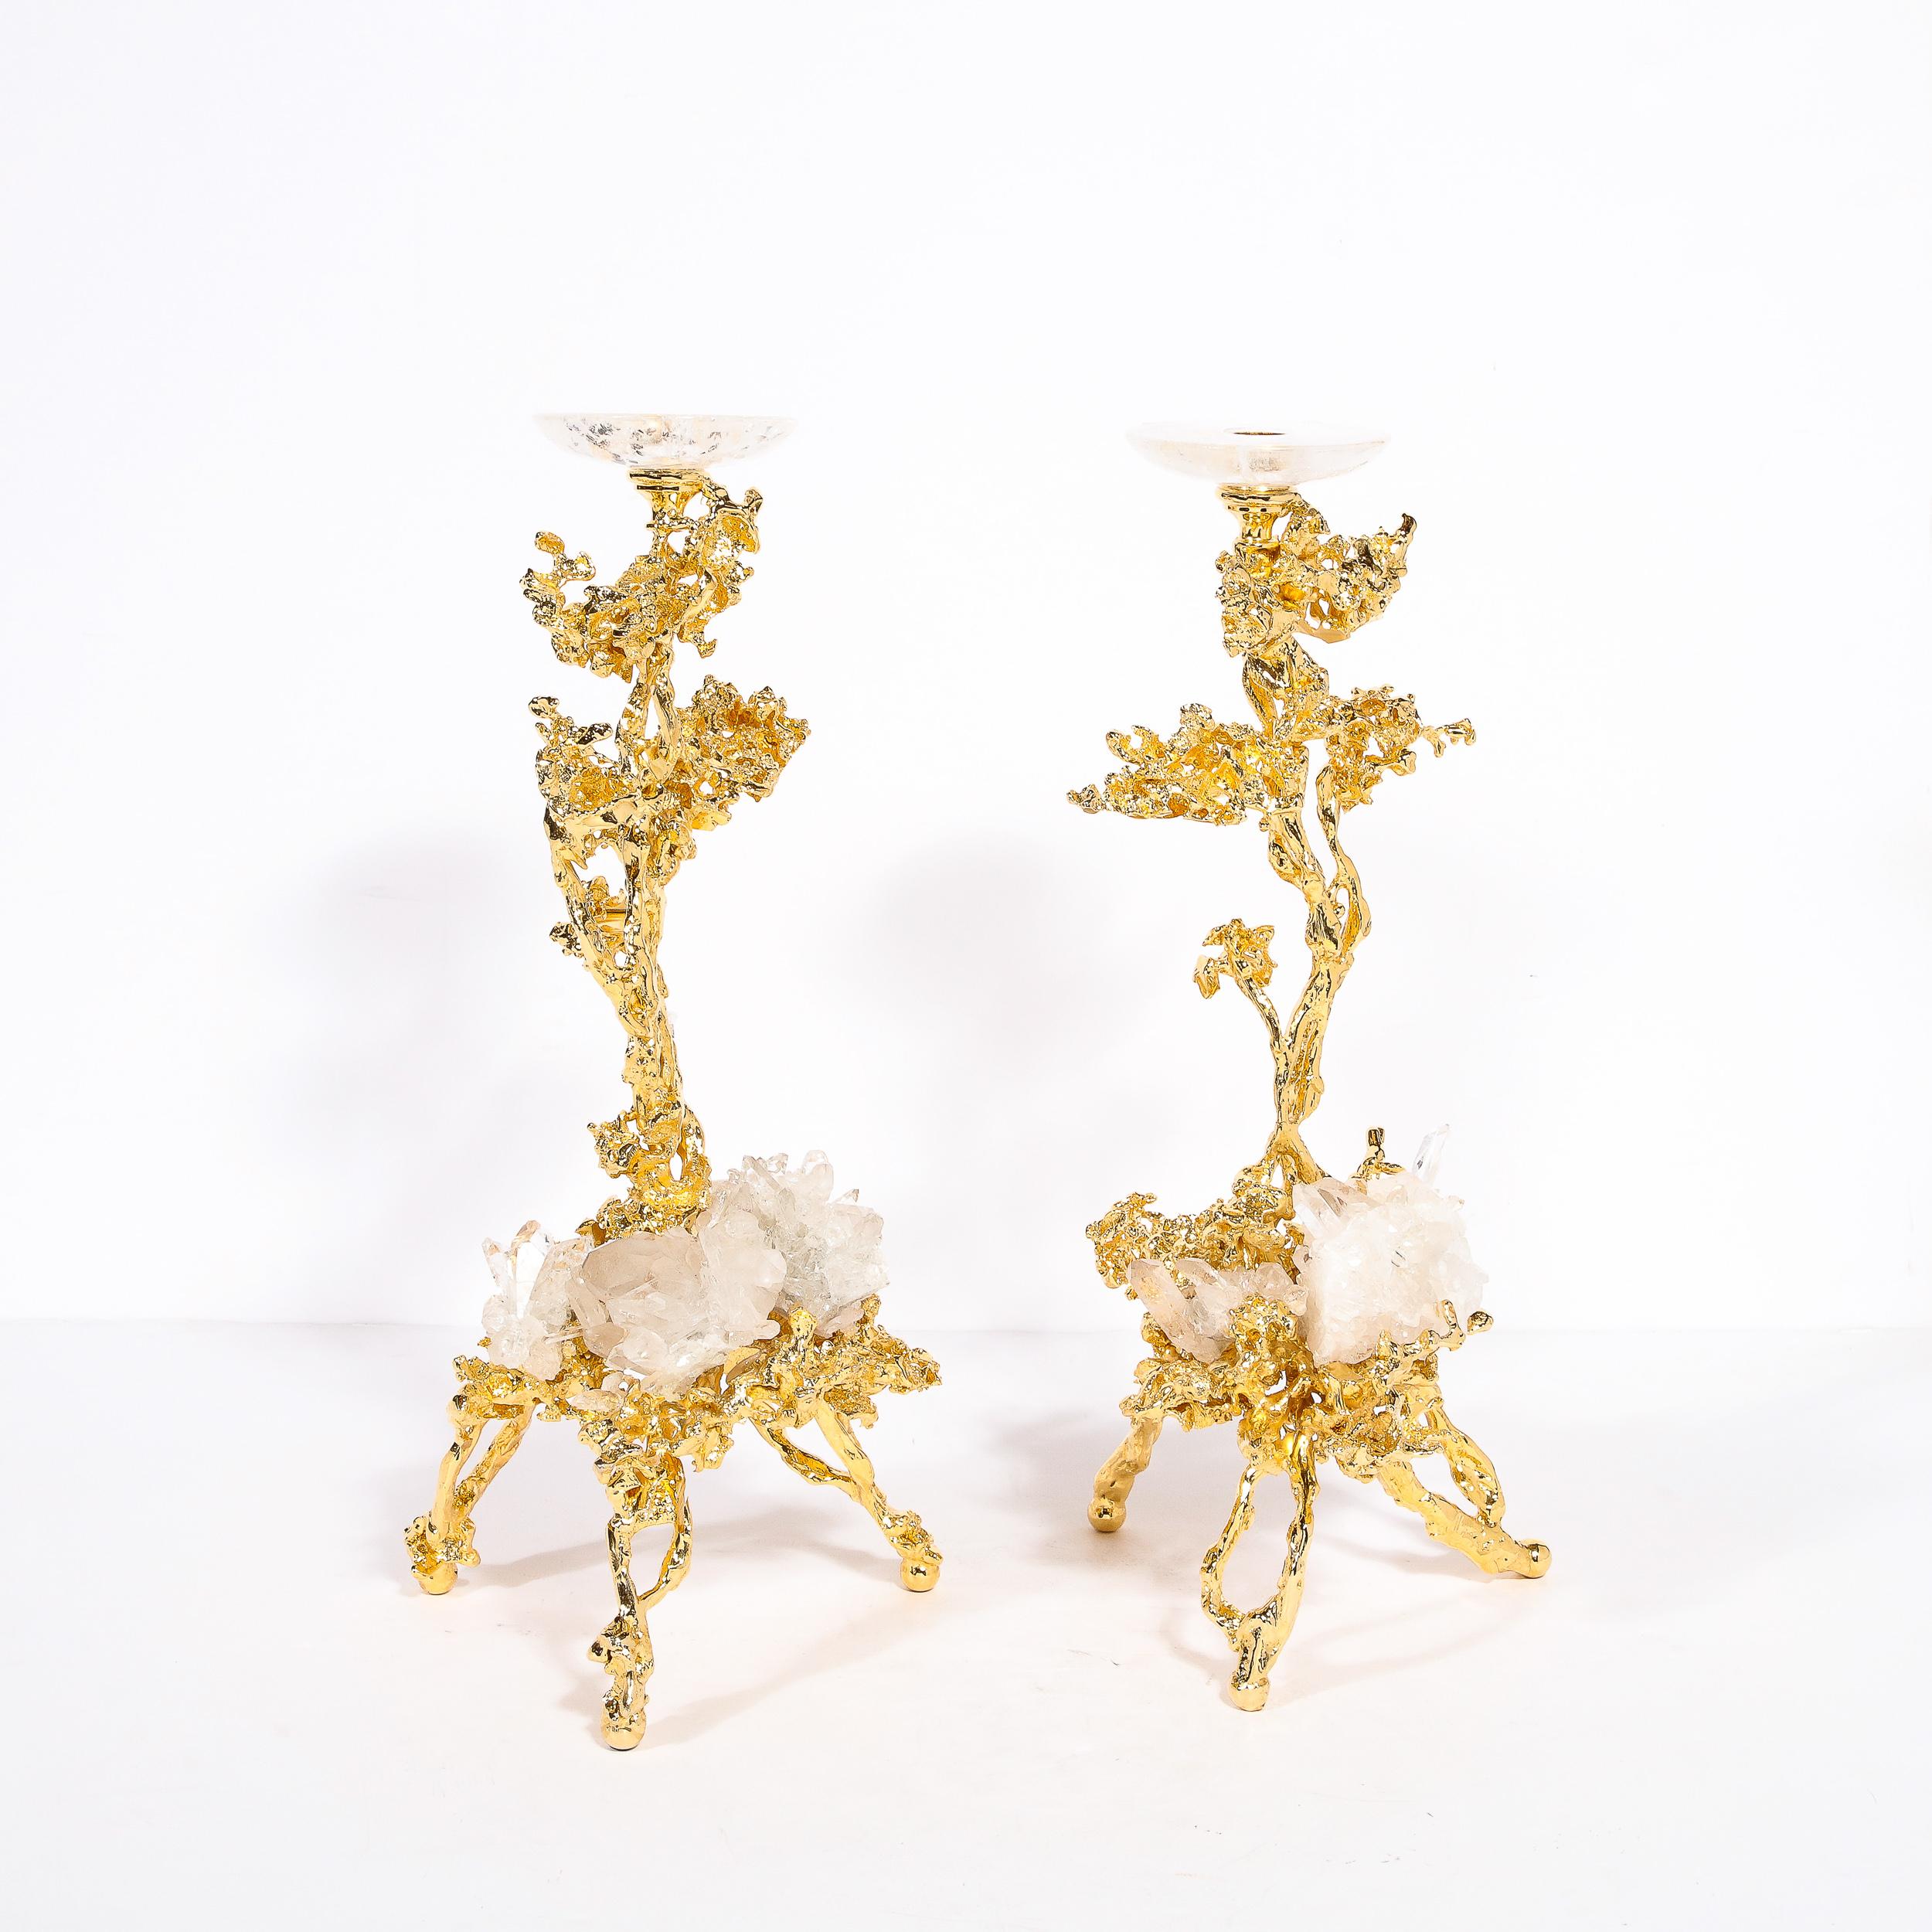 This dramatic and stunning pair of modernist candlesticks were realized in France by the esteemed artisan Claude Victor Boeltz. They offer an exploded form sculpted, by hand, and cast in bronze, consisting of a single arm and three feet plated in